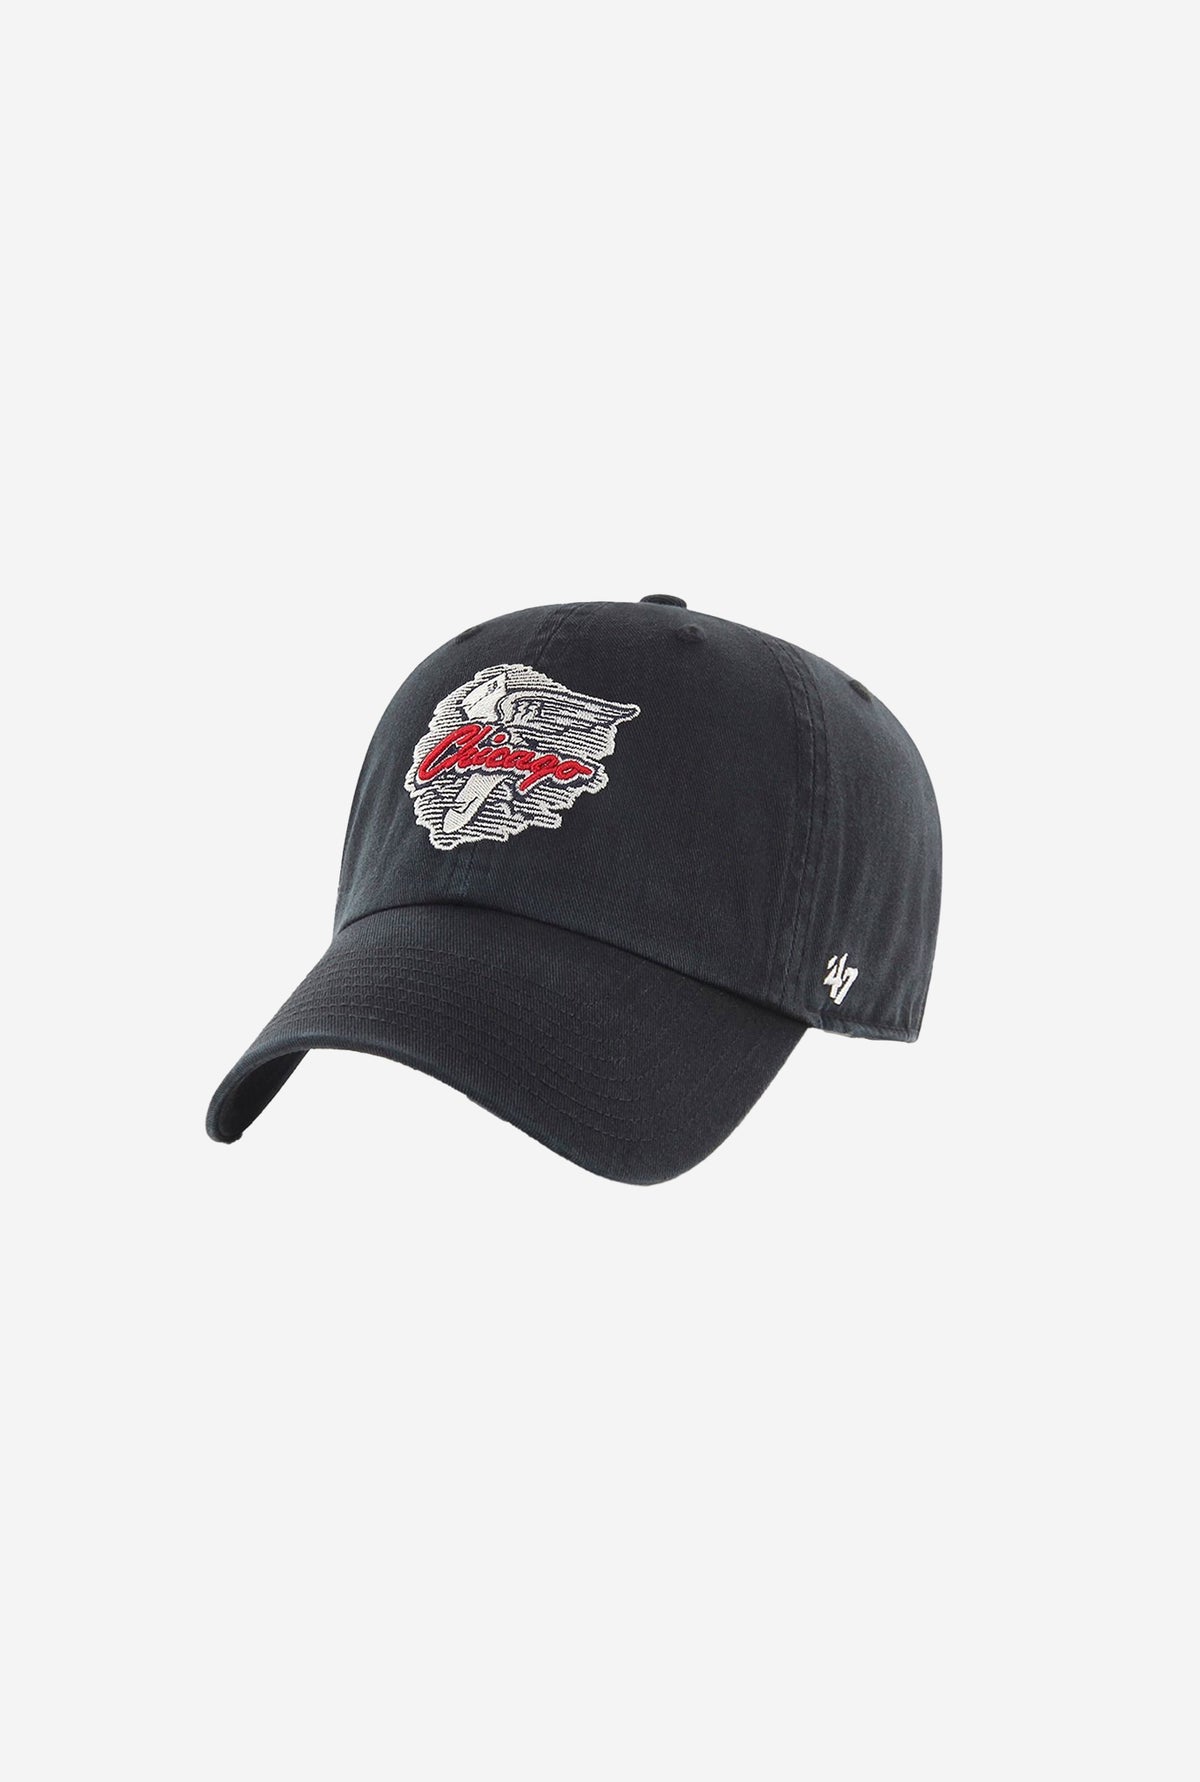 Chicago White Sox Cooperstown Clean Up Cap